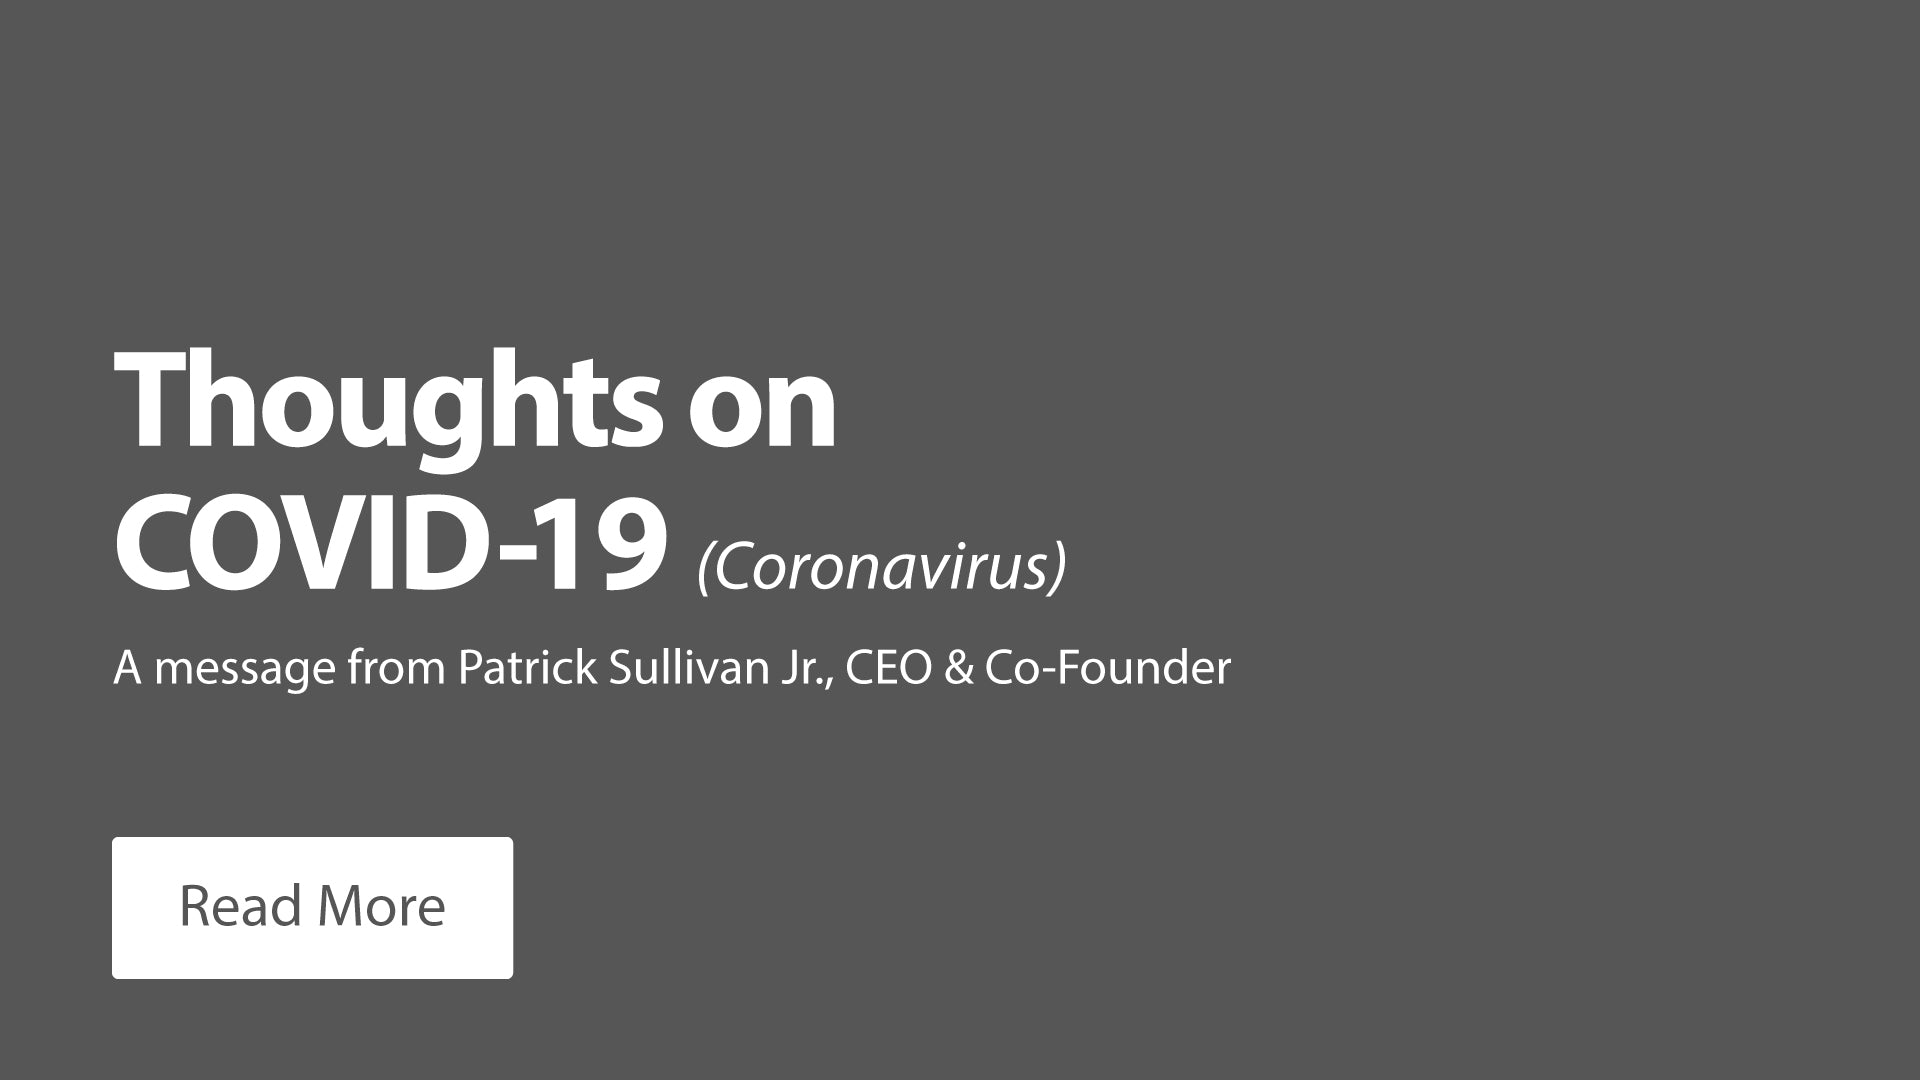 Thoughts on the COVID-19 (Coronavirus) from the CEO of a Nutritional Supplement Company